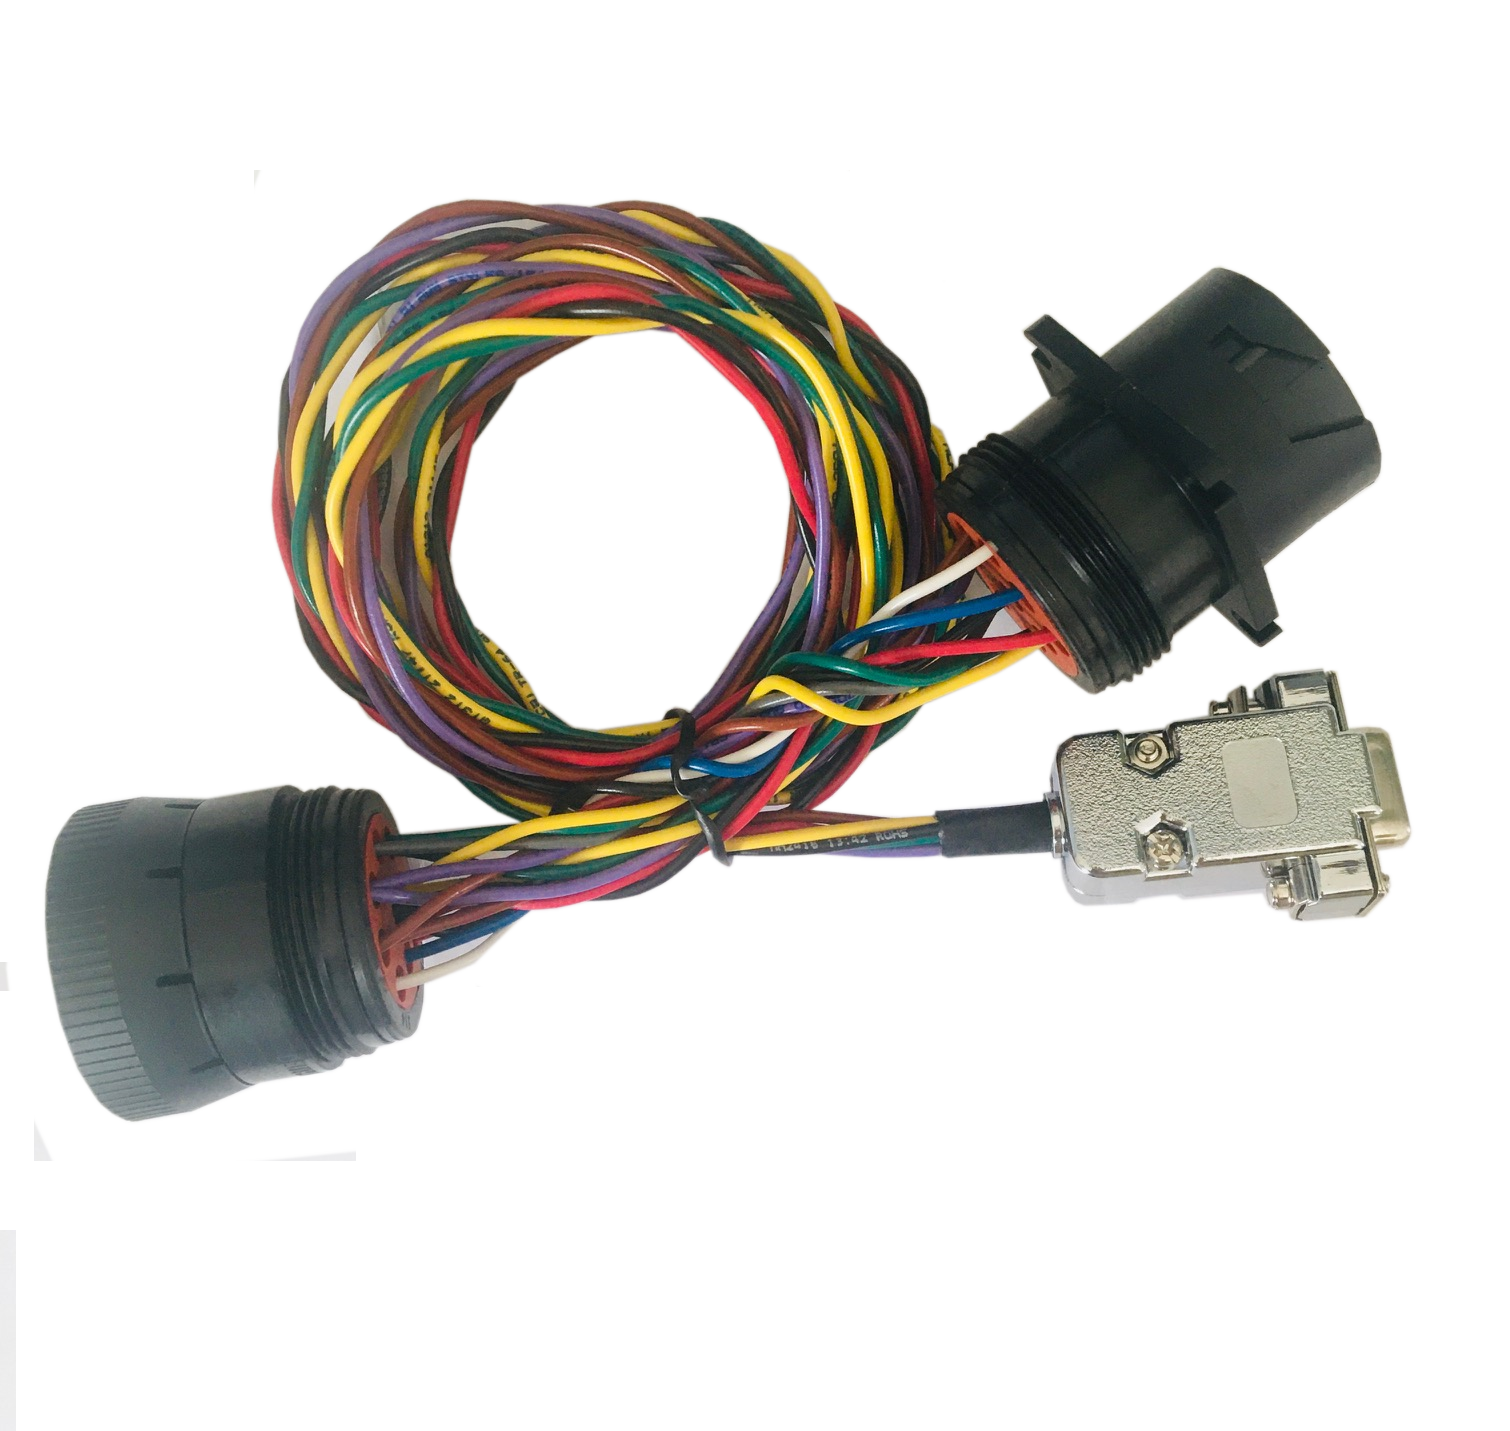 Au Y cable with two 9-way black connectors and a DB9 female connector, twisted wires, 48 inch length.